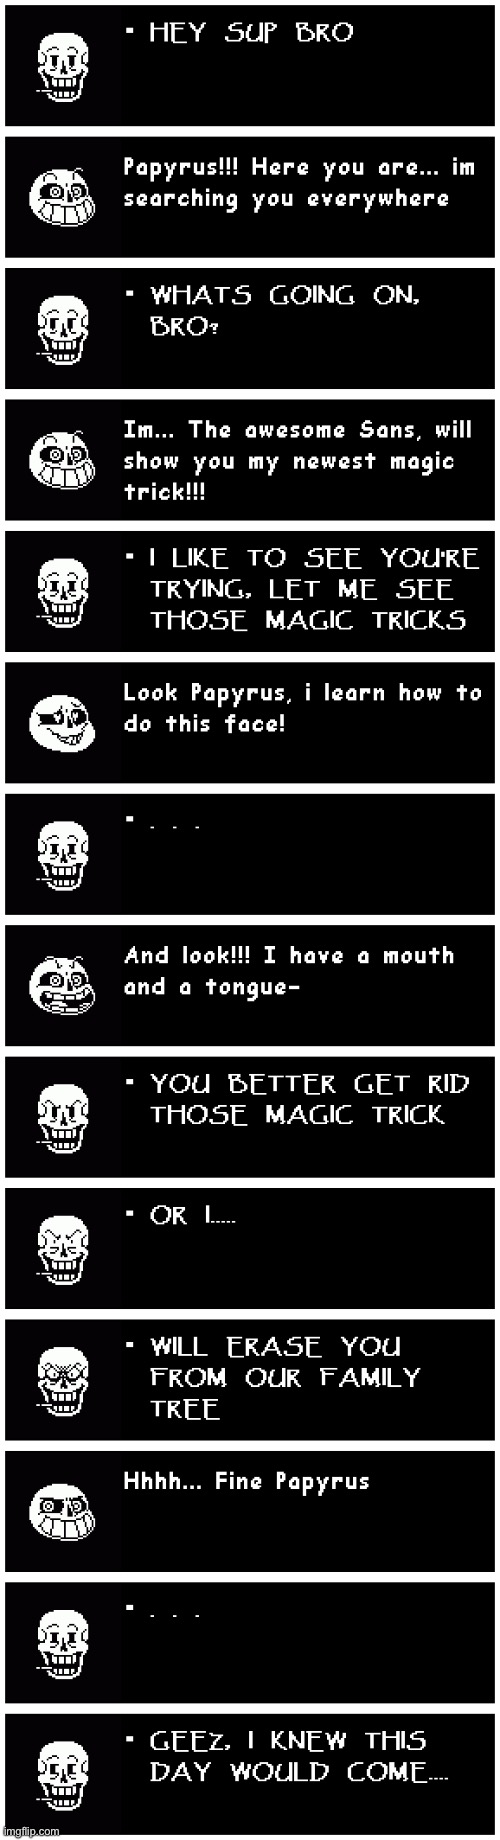 Papyrus knew the day would come | image tagged in memes,funny,papyrus,sans,undertale,comics/cartoons | made w/ Imgflip meme maker